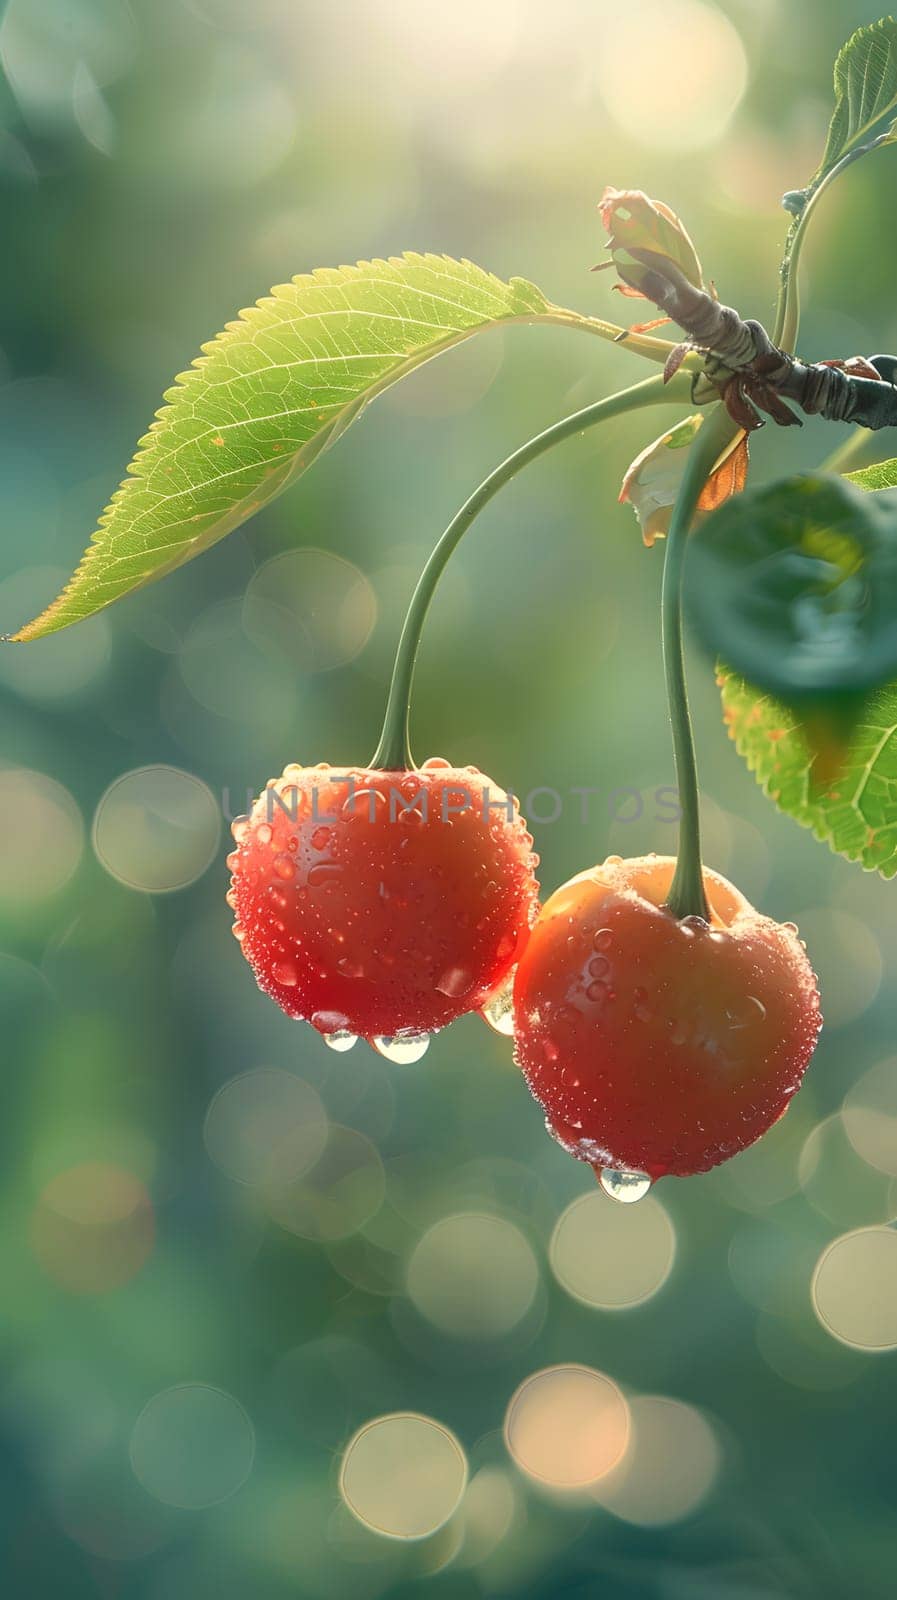 Two cherries, a type of seedless fruit, displayed on a tree branch with water drops, showcasing the natural beauty of plants and fruits in a garden setting